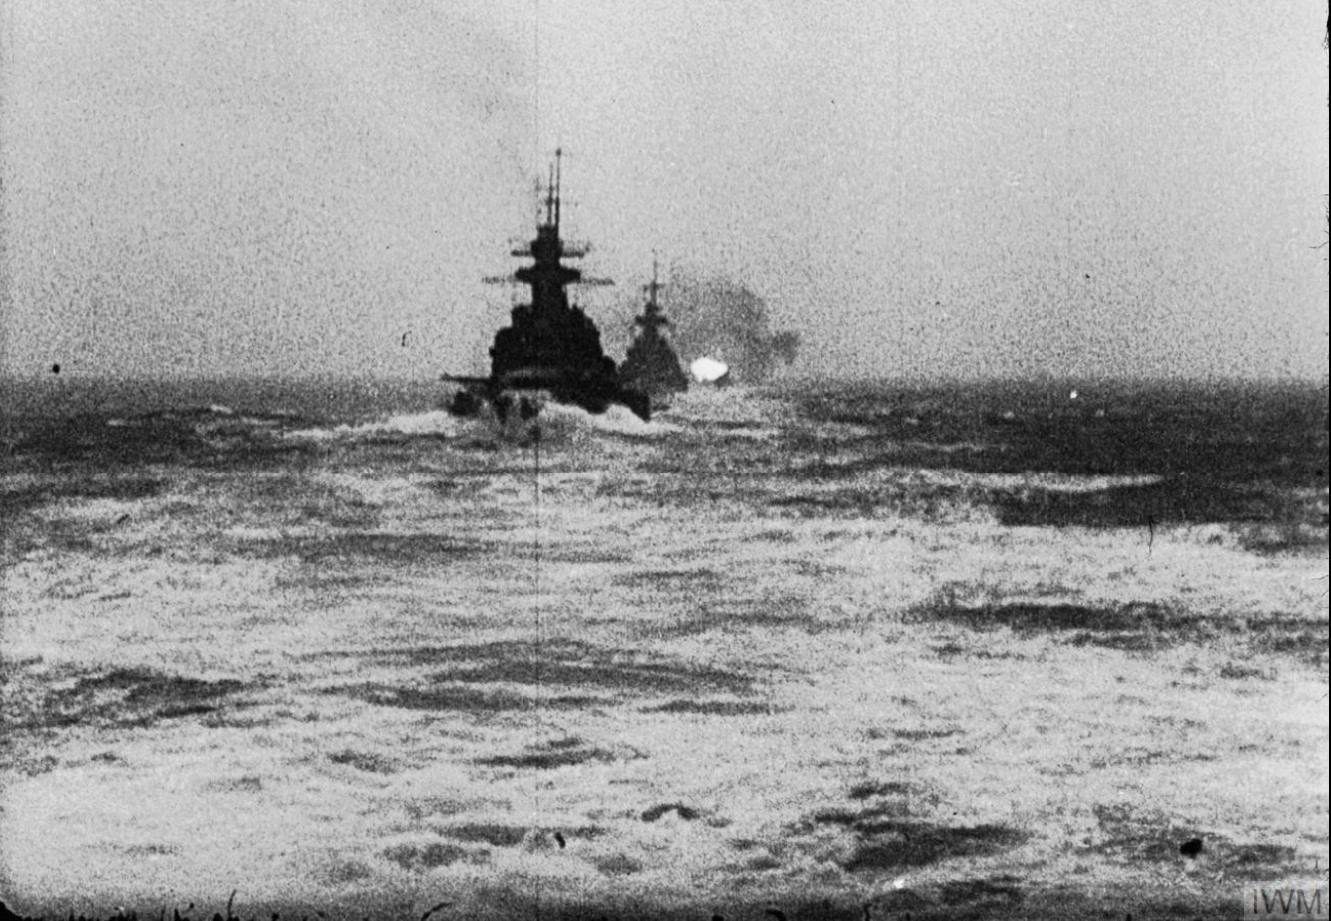 The Battleships Scharnhorst and Gneisenau steaming up the English Channel